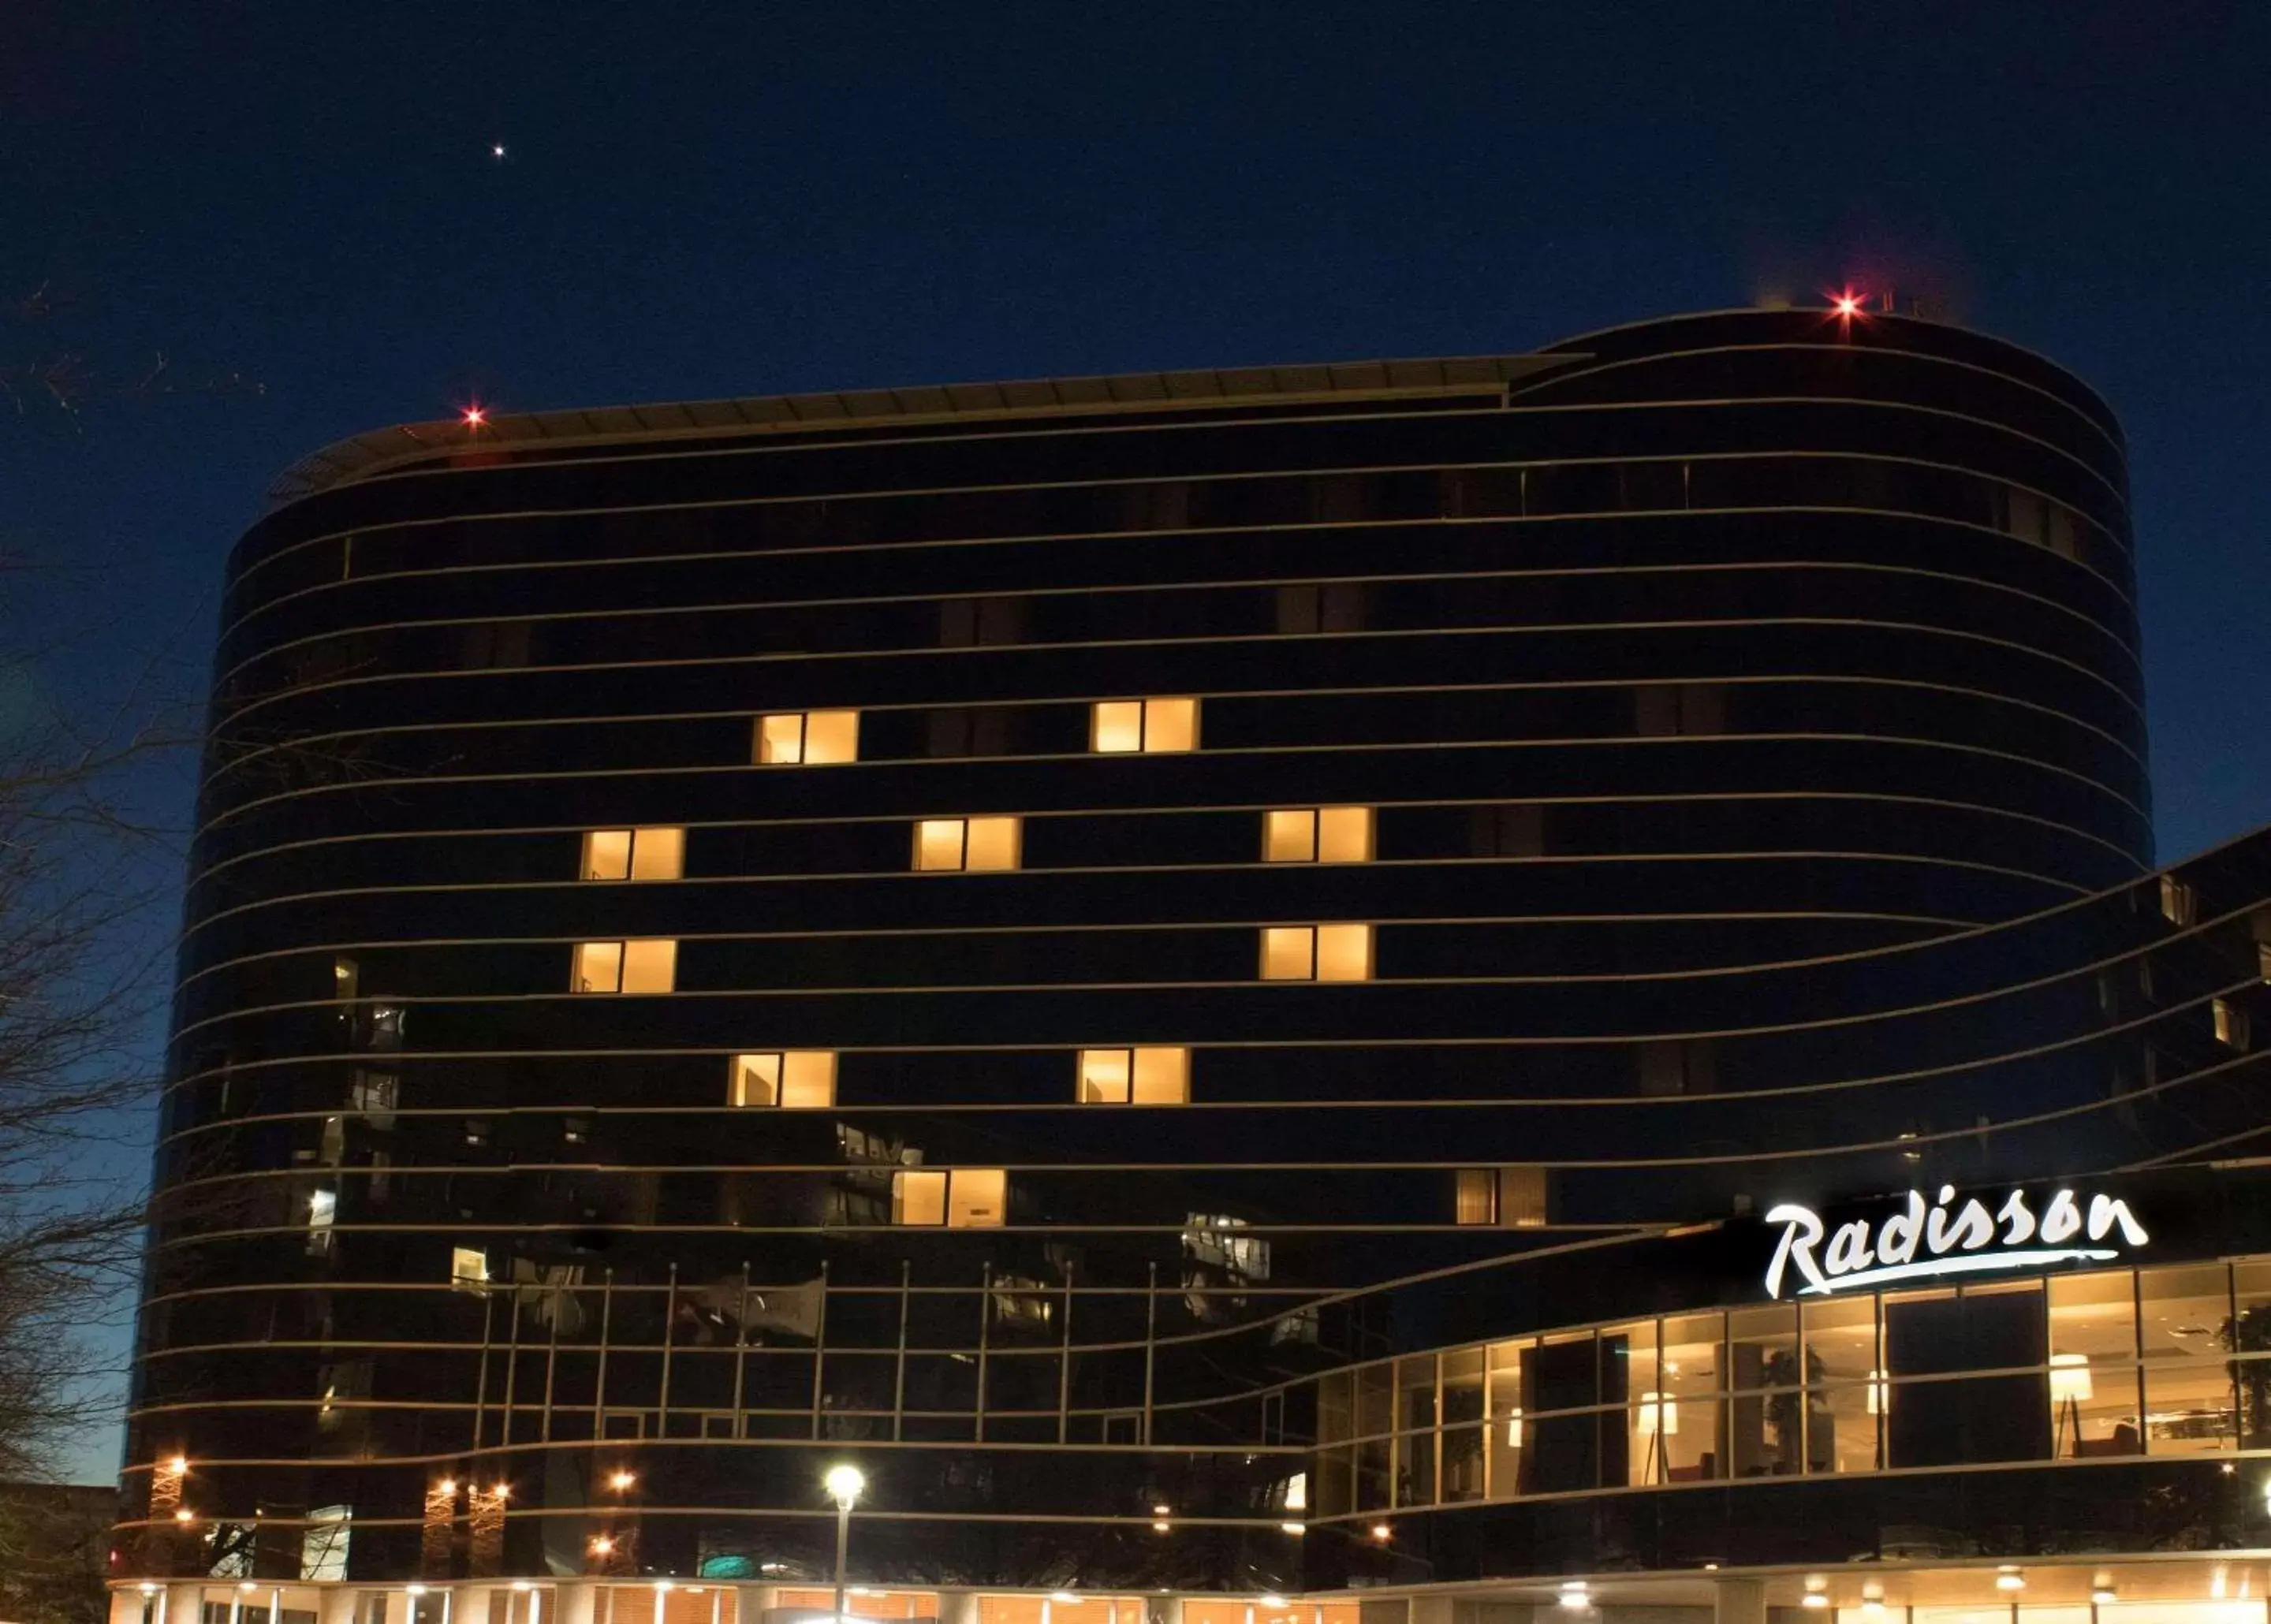 Property Building in Radisson Hotel Vancouver Airport